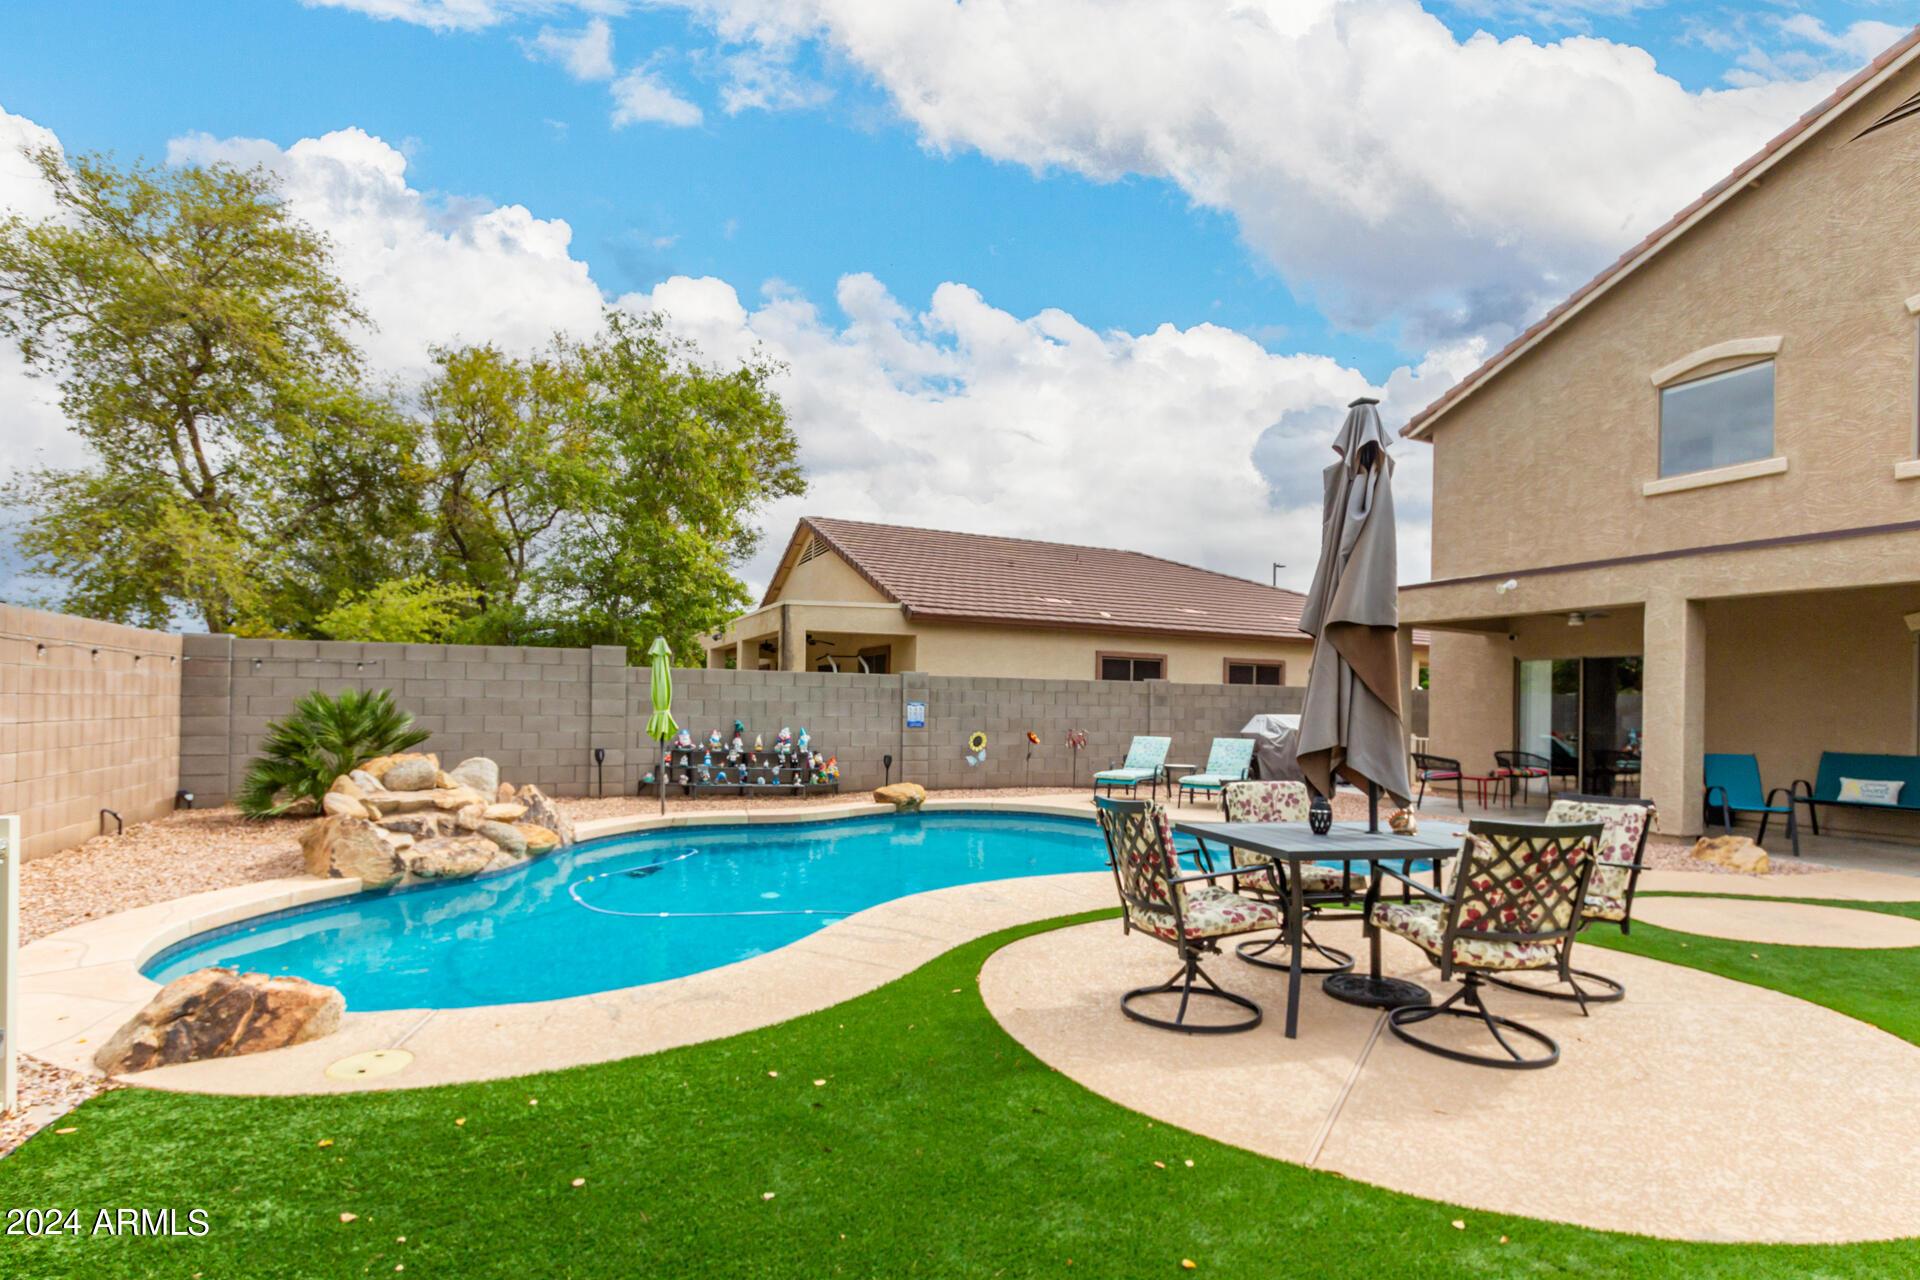 Photo one of 434 S 166Th Dr Goodyear AZ 85338 | MLS 6689425